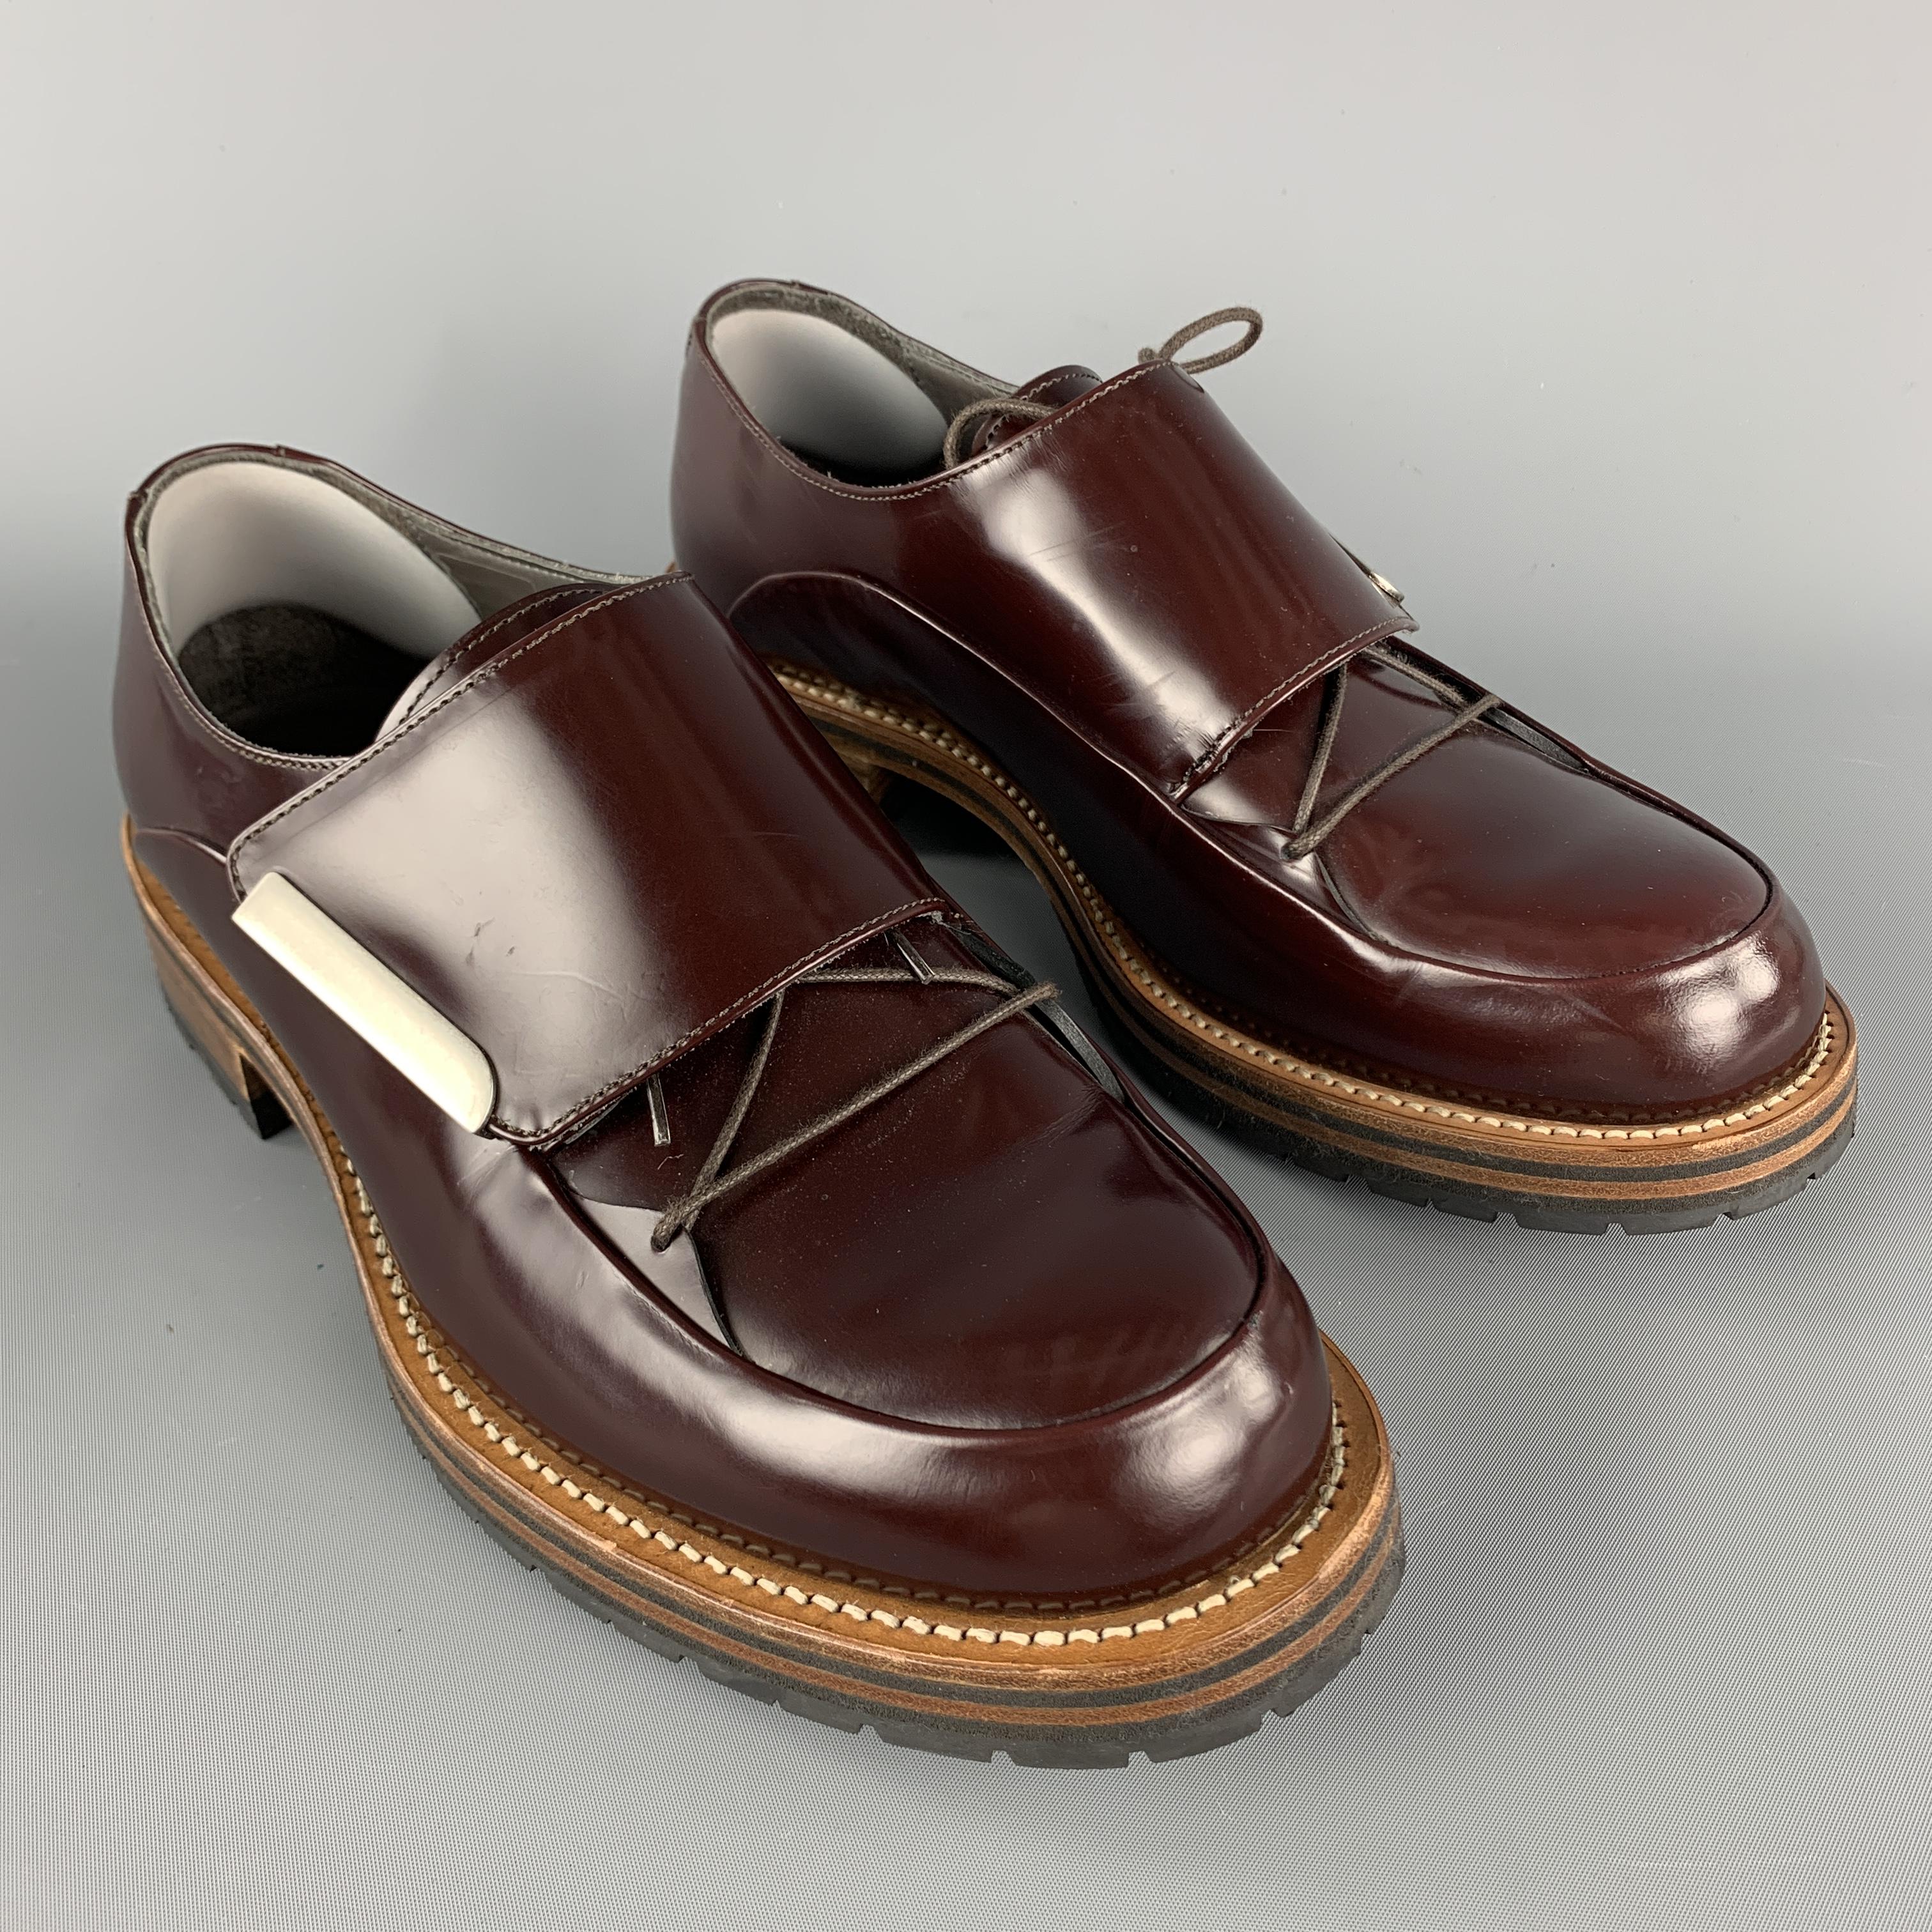 PORTS 1961 Lace Up Shoes comes in burgundy solid leather material, with a tab closure, and a silver metal tone hardware.  Made in Italy.

Excellent Pre-Owned Condition.
Marked: 41

Outsole: 12 x 4.5 in.